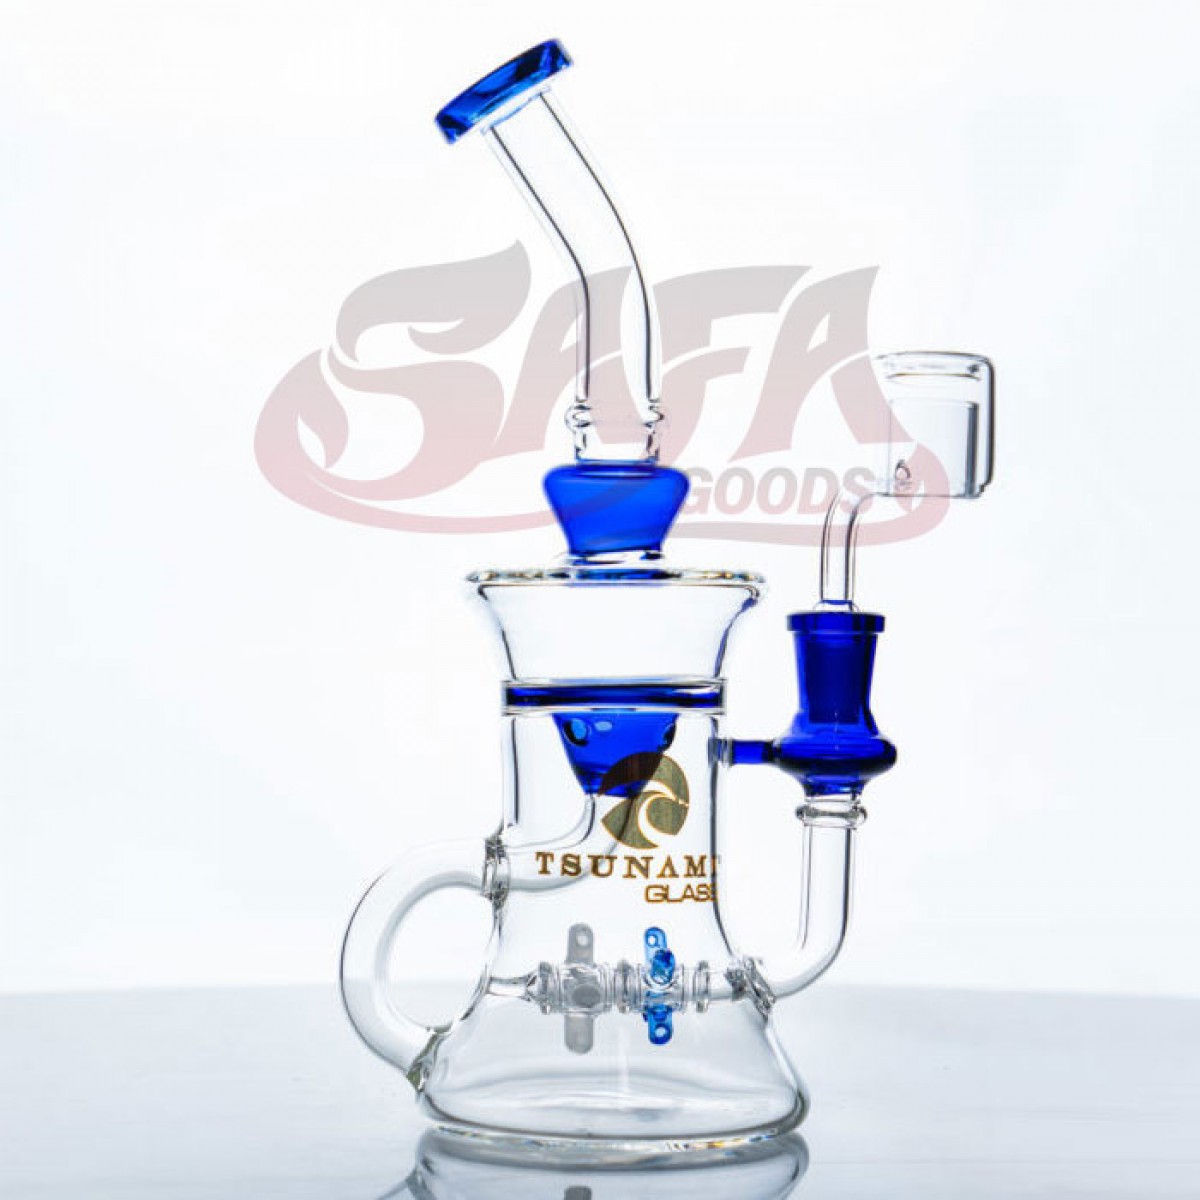 Tsunami 9" Propeller Recycler Concentrate Rig Waterpipe